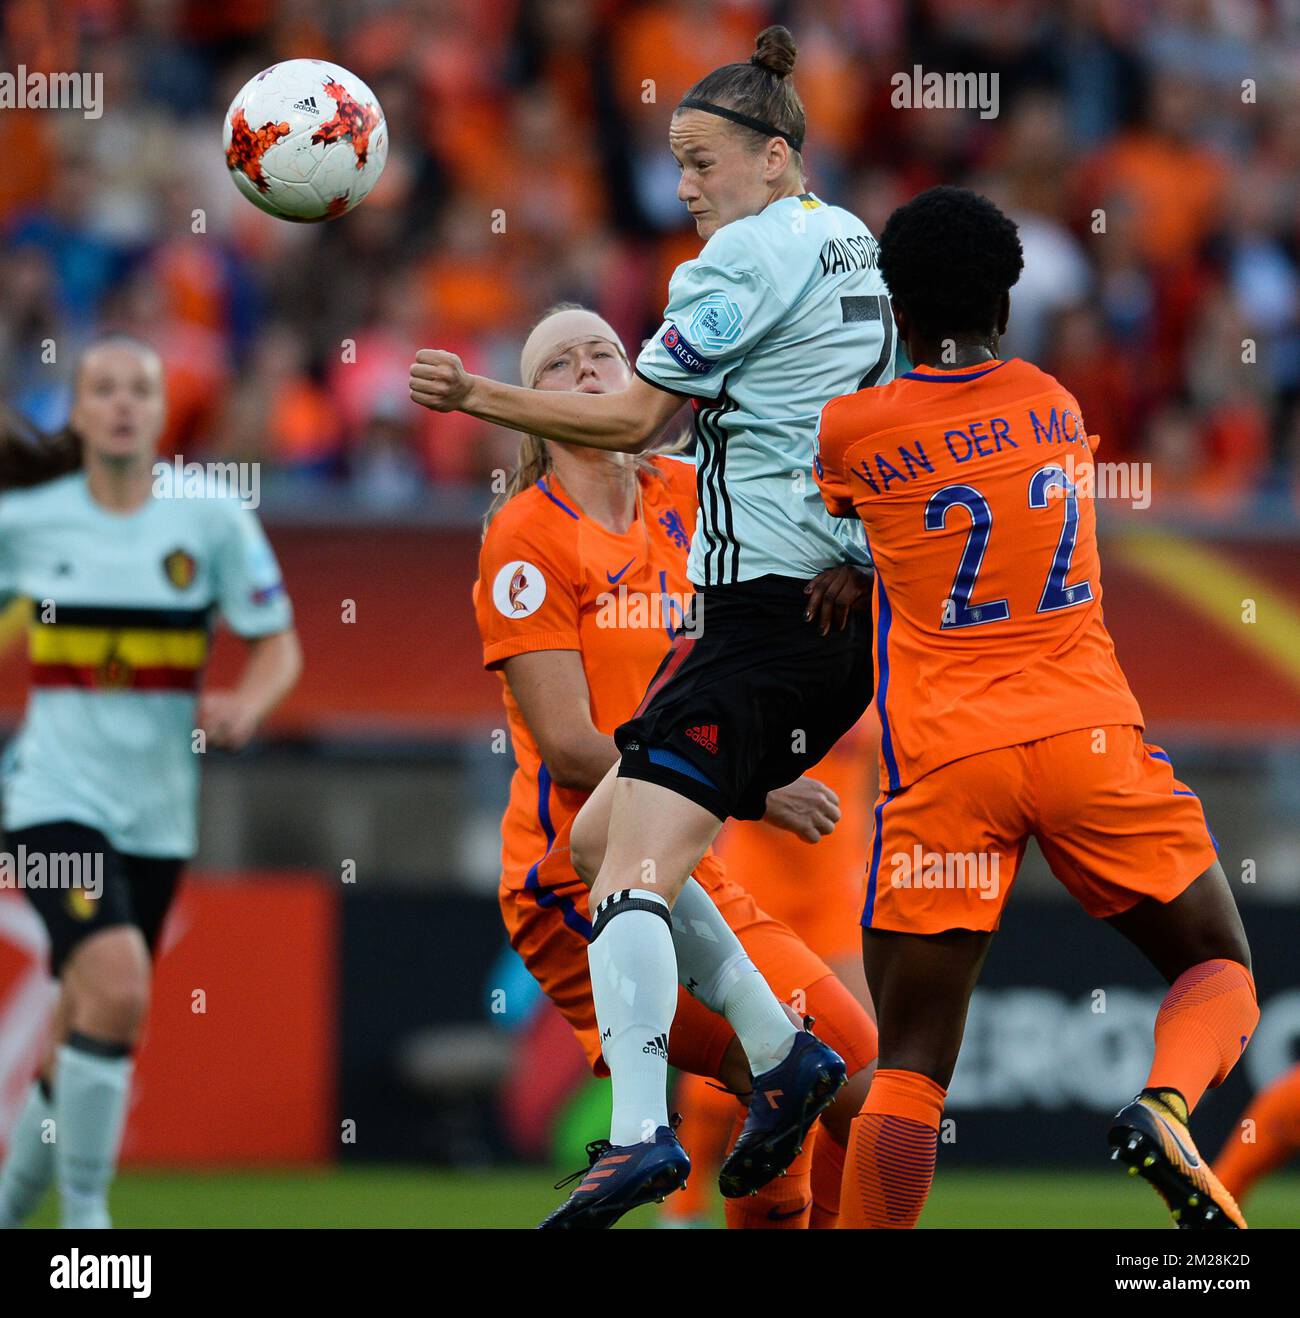 Belgium's Elke Van Gorp and Dutch Liza van der Most pictured in action during a soccer game between Belgian national women's soccer team Red Flames and The Netherlands, the third game in group A in the group stage of the Women's European Championship 2017 in the Netherlands, Monday 24 July 2017 in Tilburg, The Netherlands. BELGA PHOTO DAVID CATRY Stock Photo